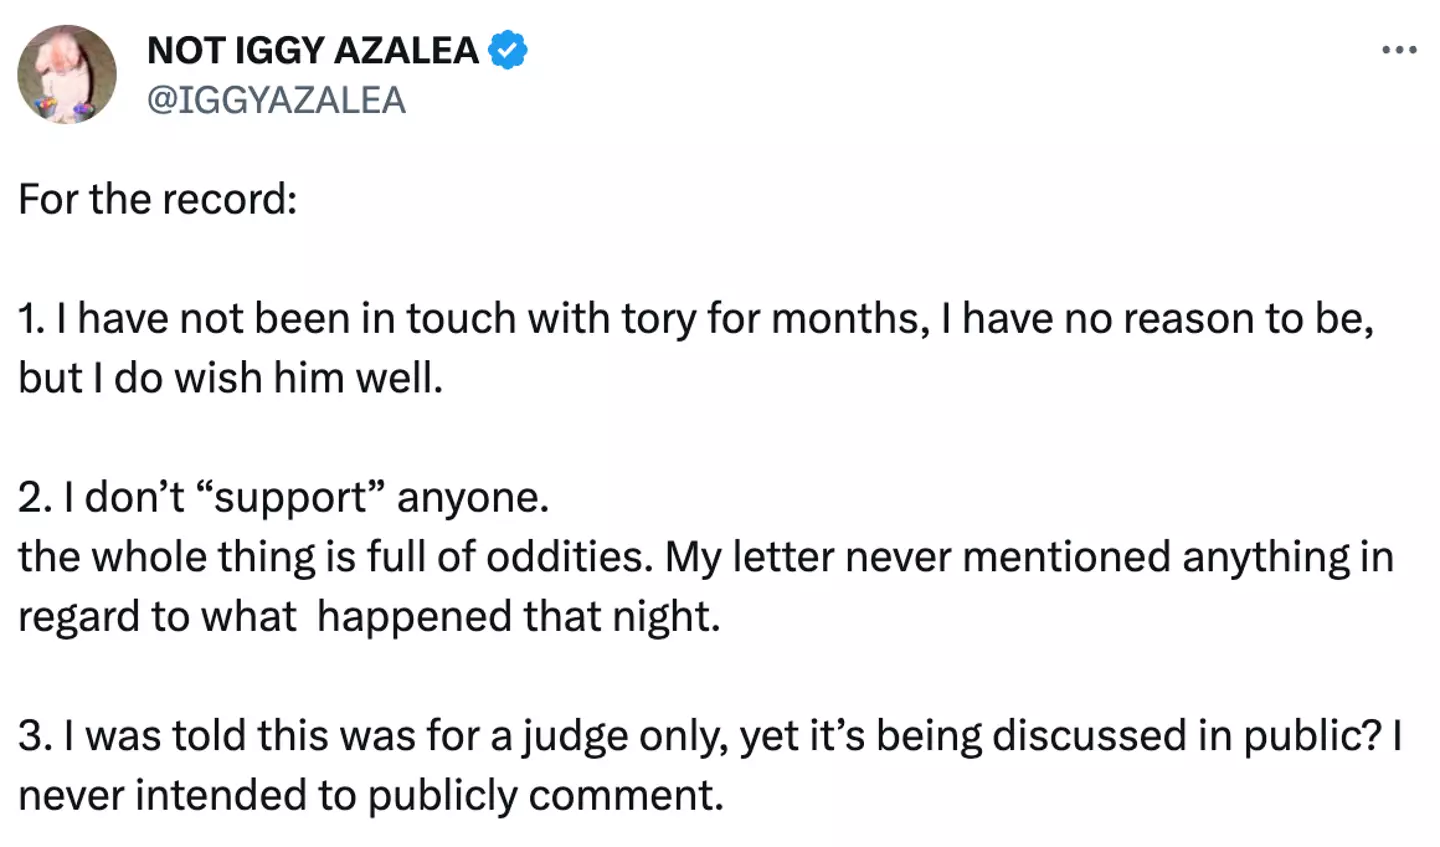 Iggy Azalea shared a series of points after the report of her letter came to light.